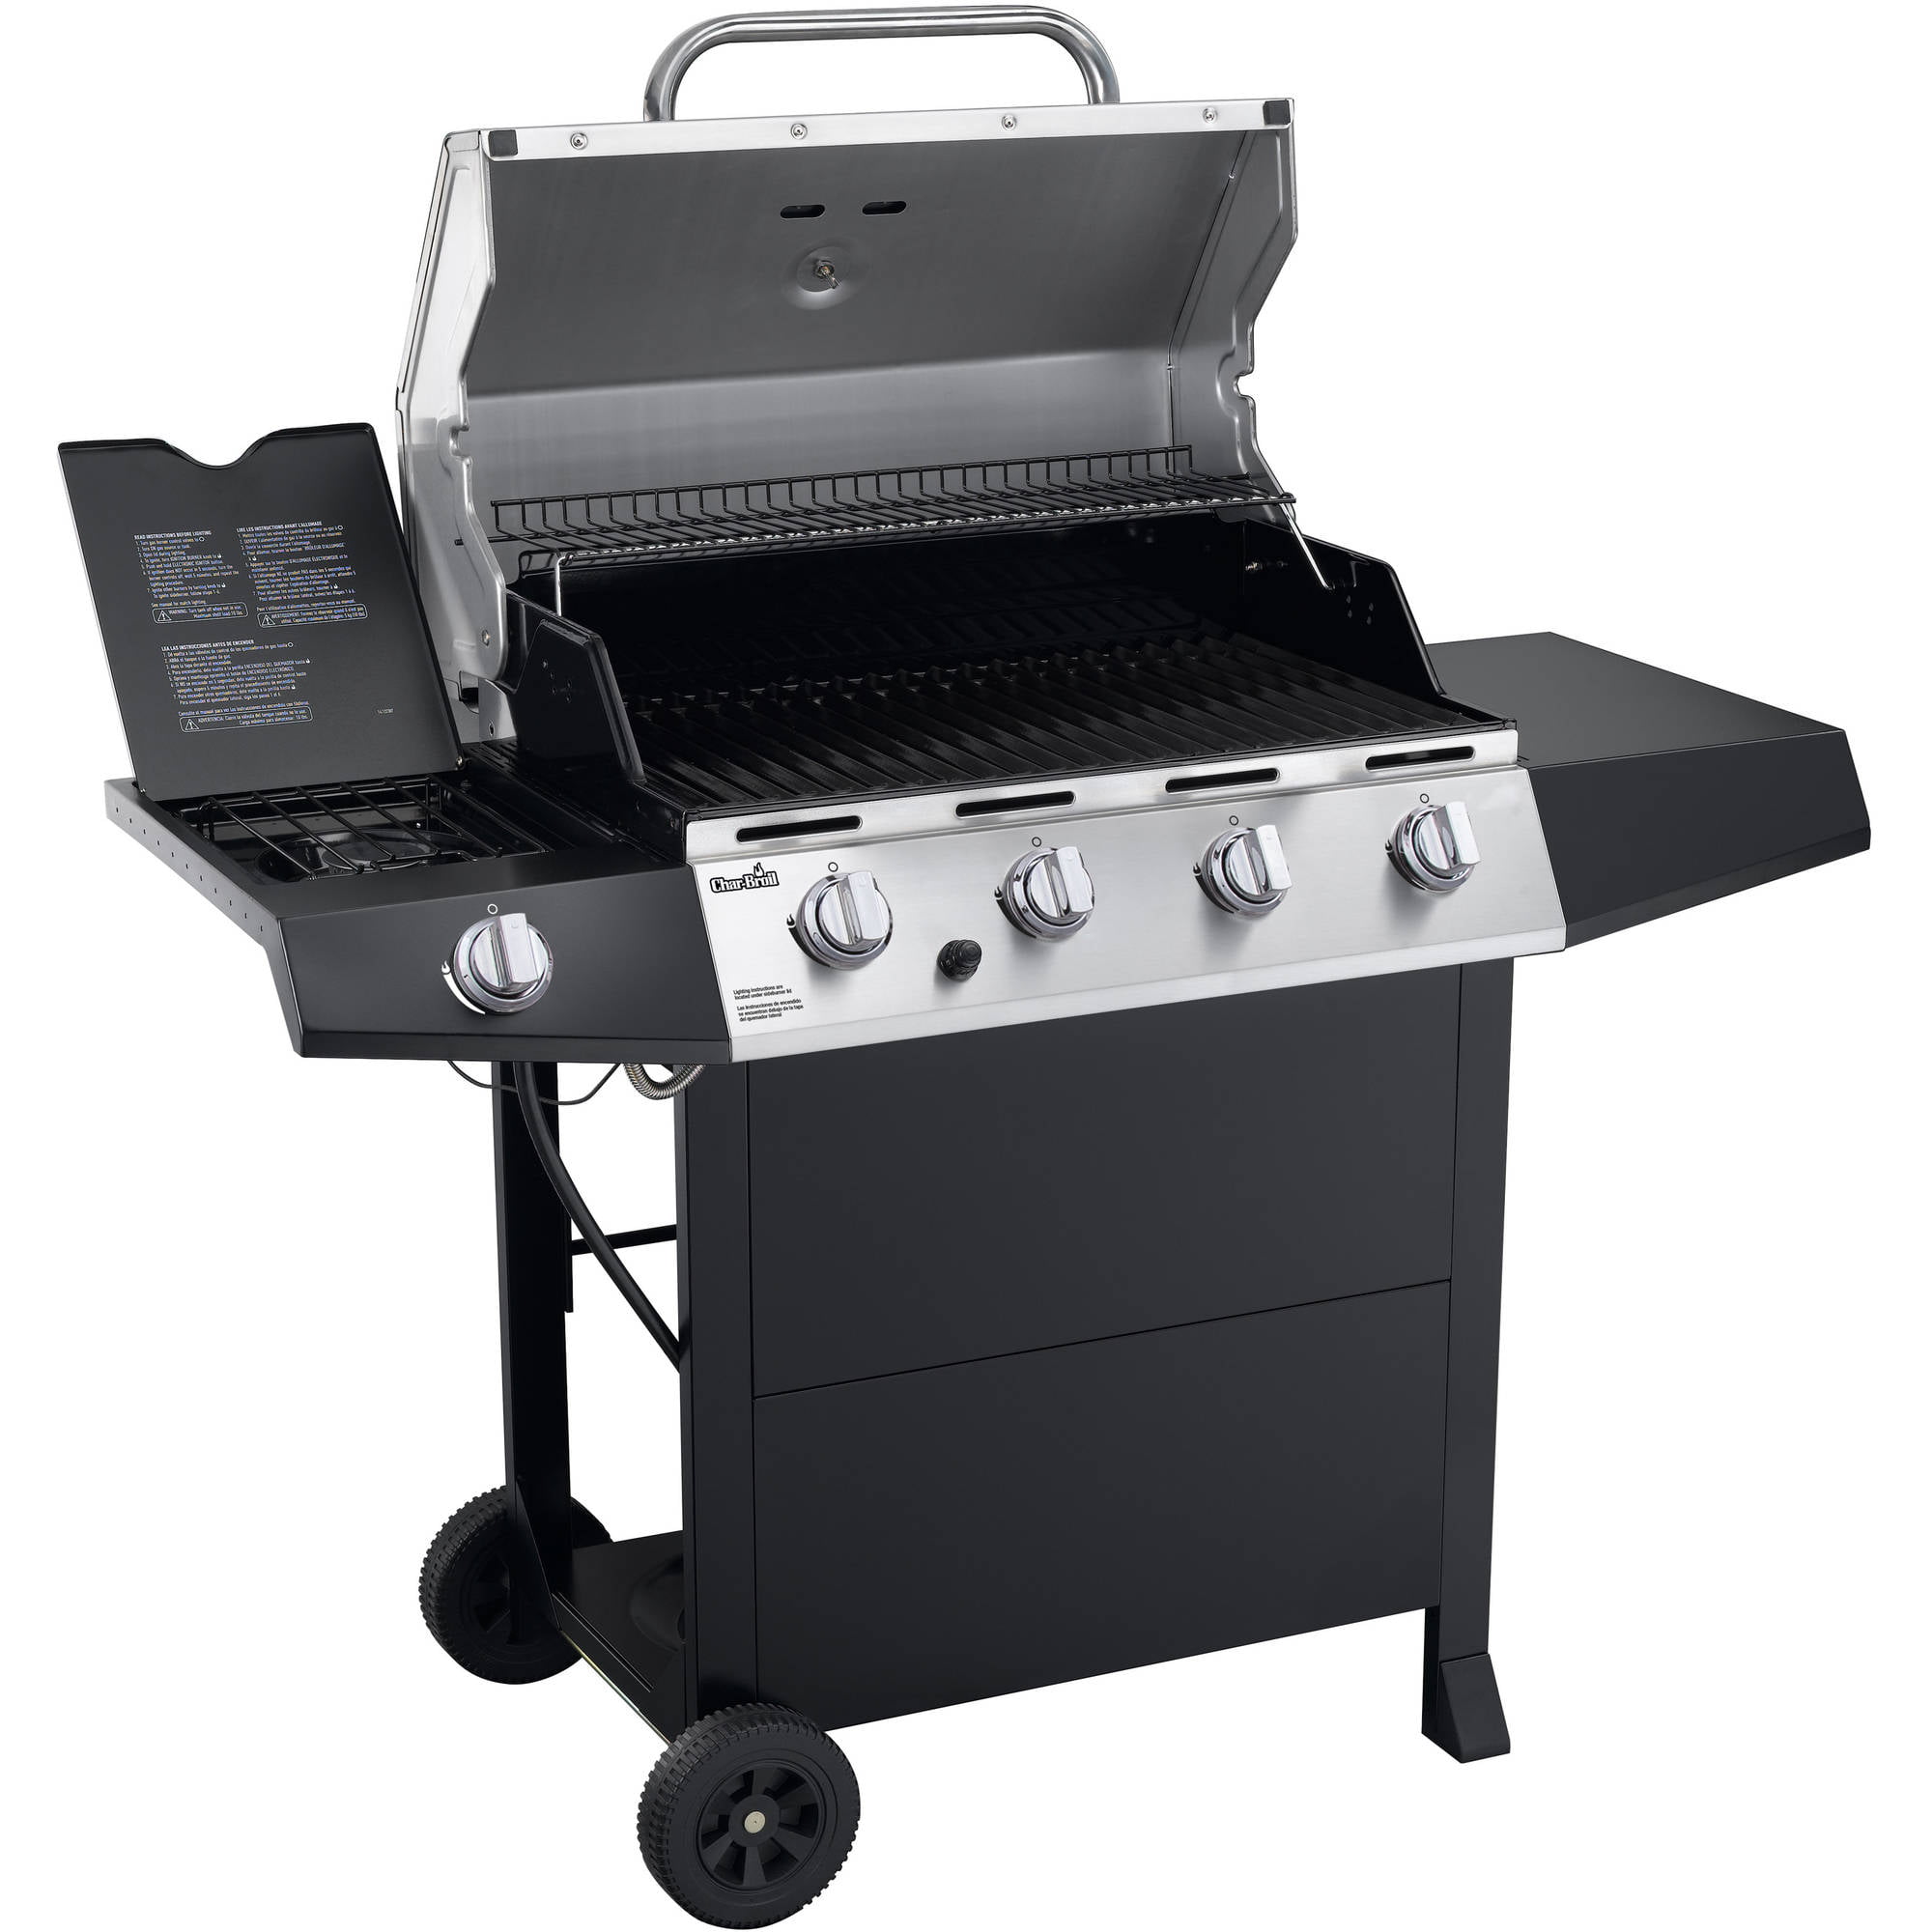 What are some brands of backyard classic grills?